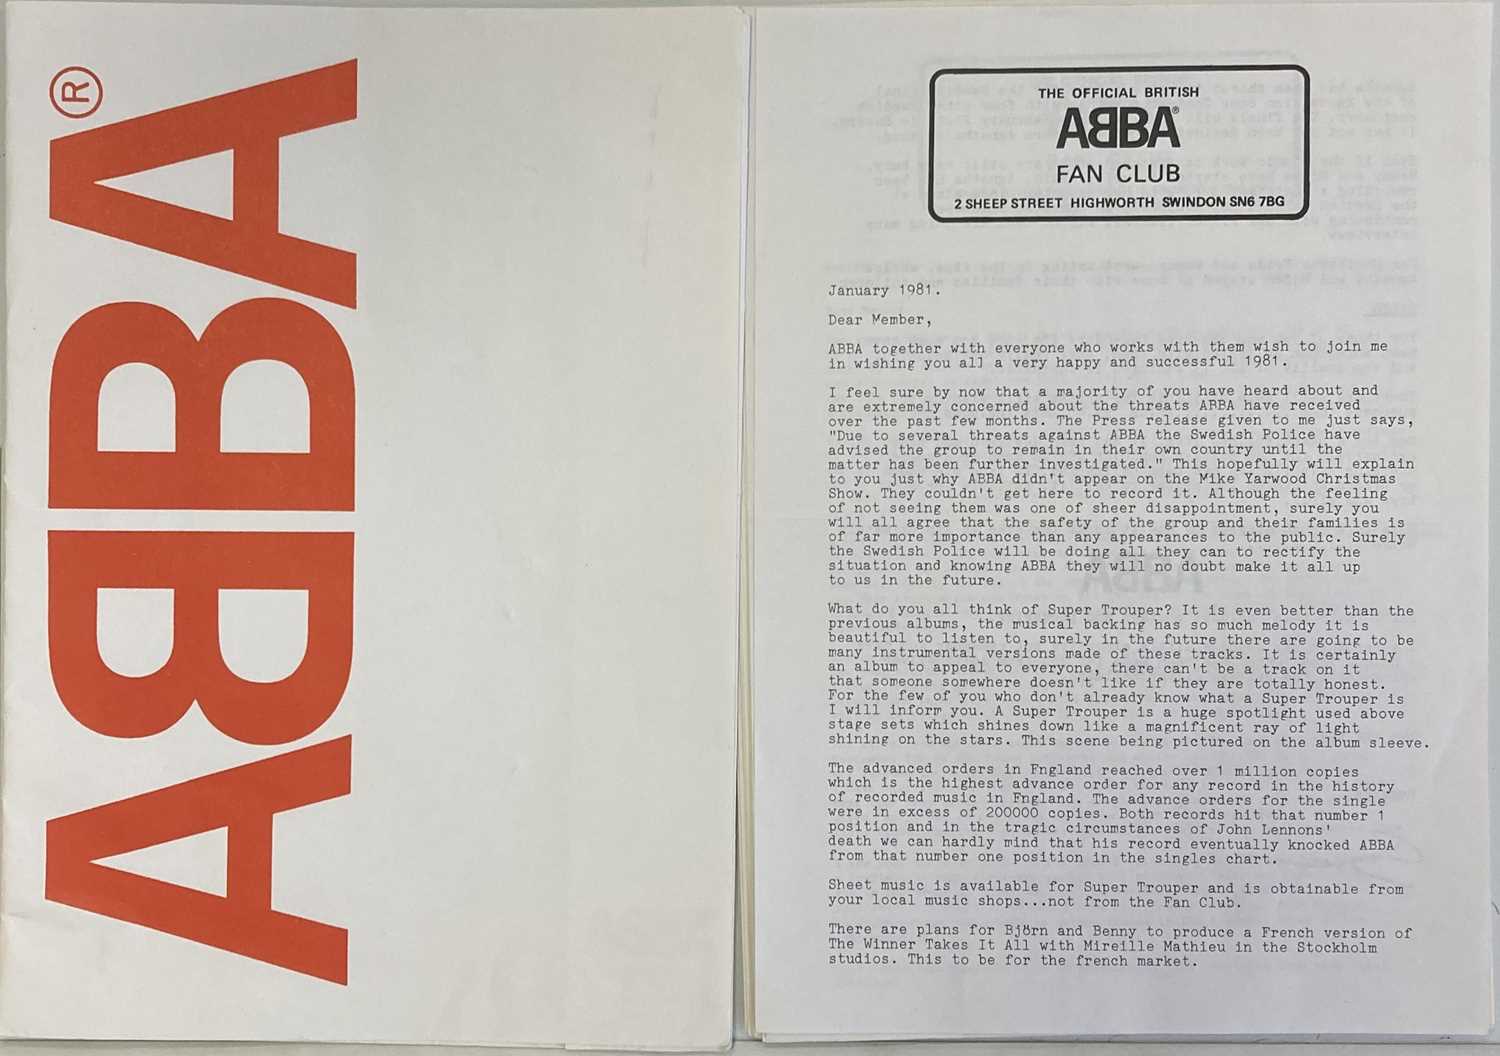 ABBA FAN CLUB PACK - Image 2 of 4